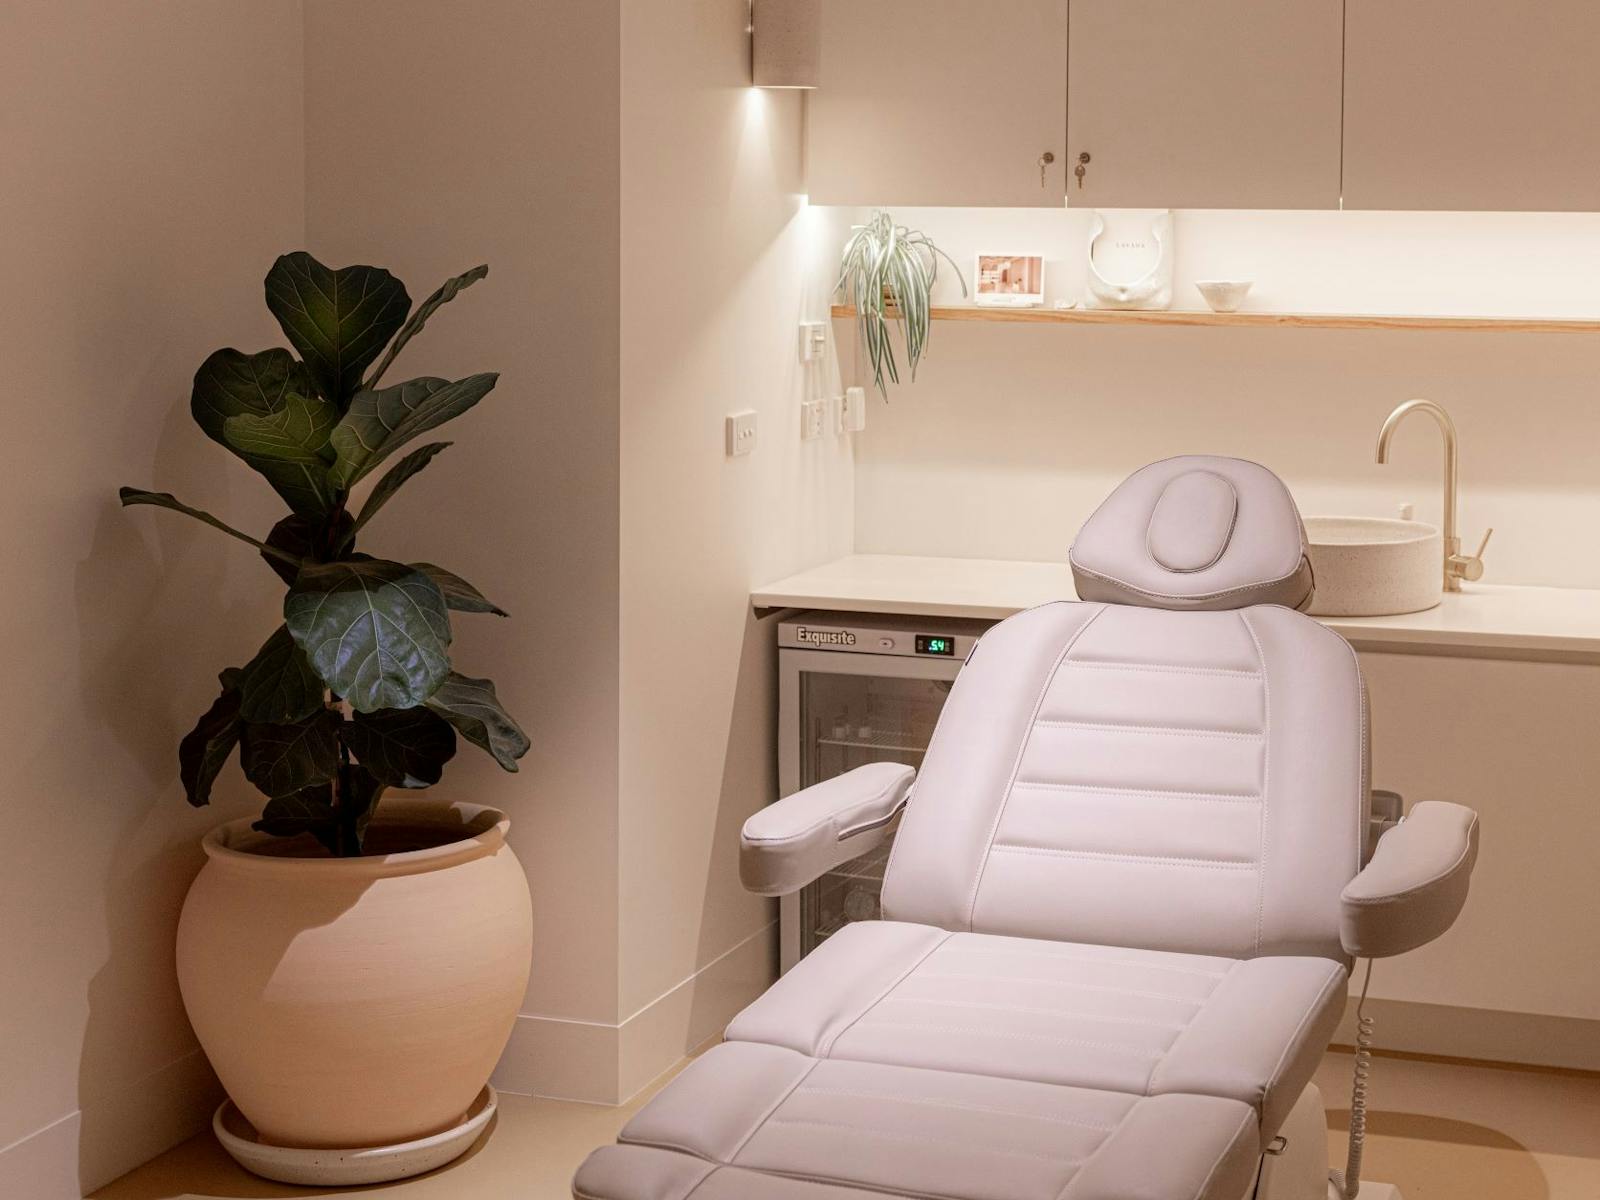 Relax with peace of mind in our medical grade comsetic rooms